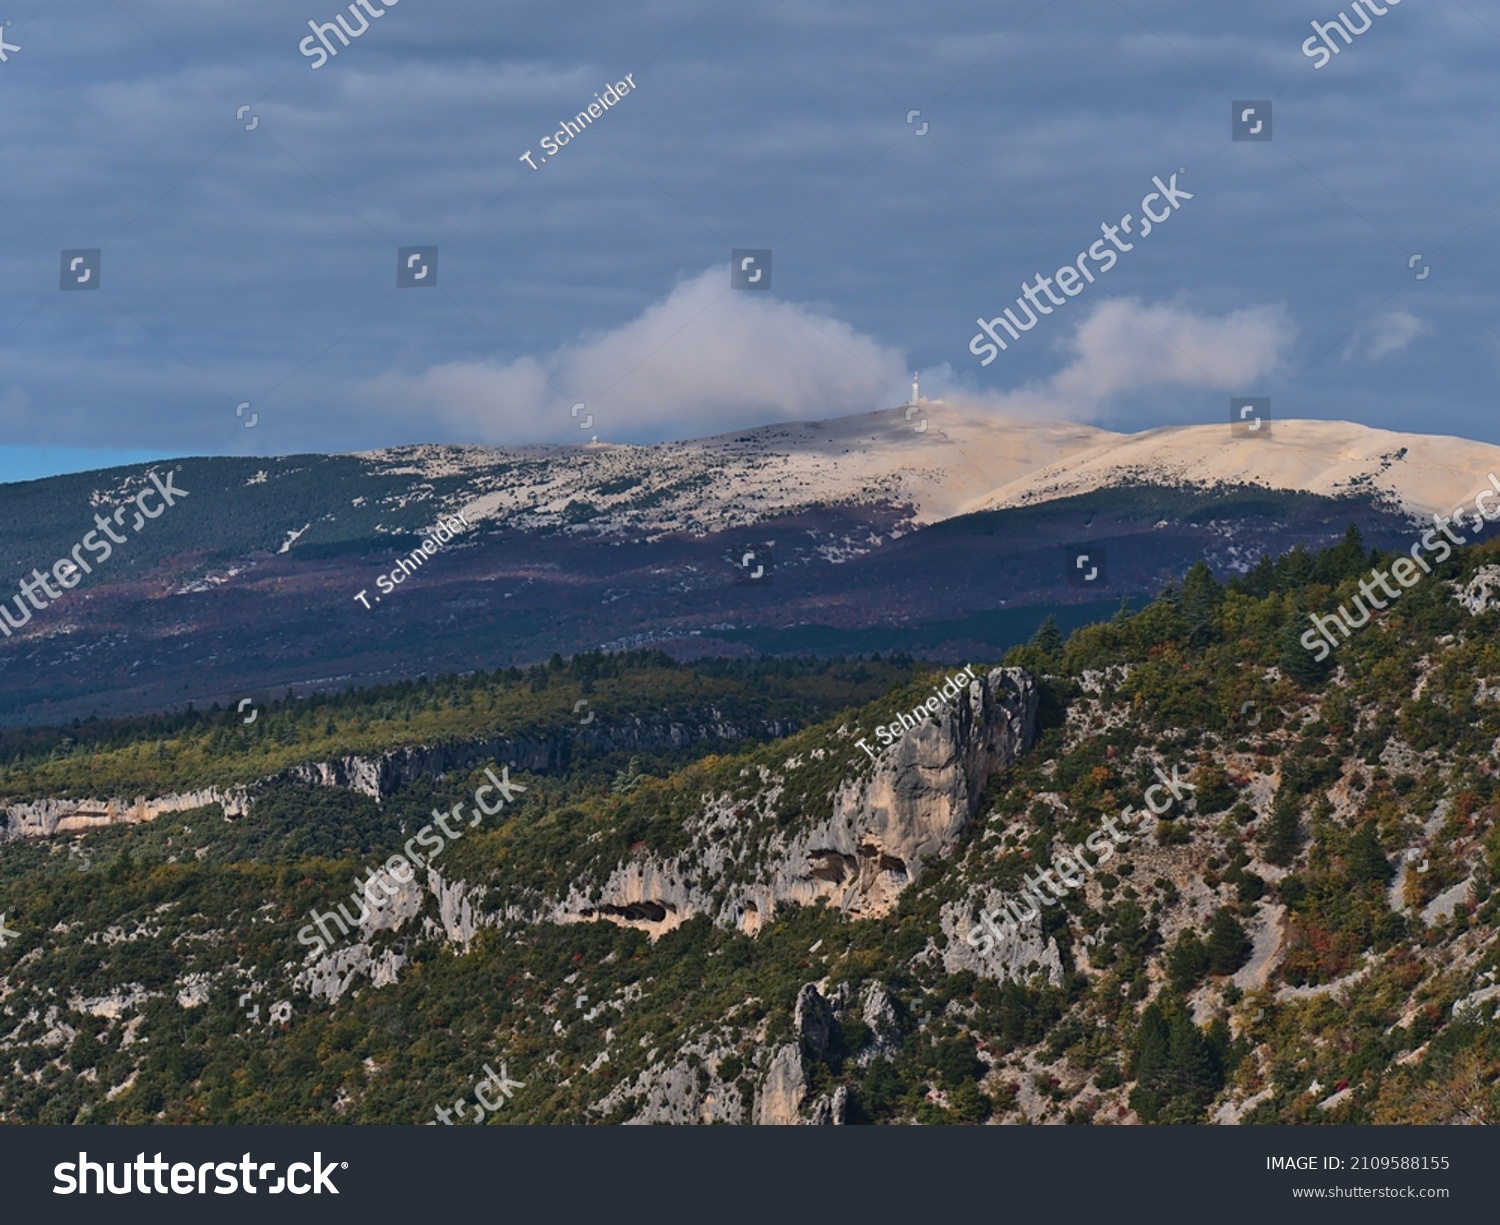 Beautiful view of bare mountain Mont Ventoux above the rocky canyon Gorges de la Nesque in the Vaucluse Mountains in Provence region, France on sunny day in autumn season with cloudy in the sky. #2109588155